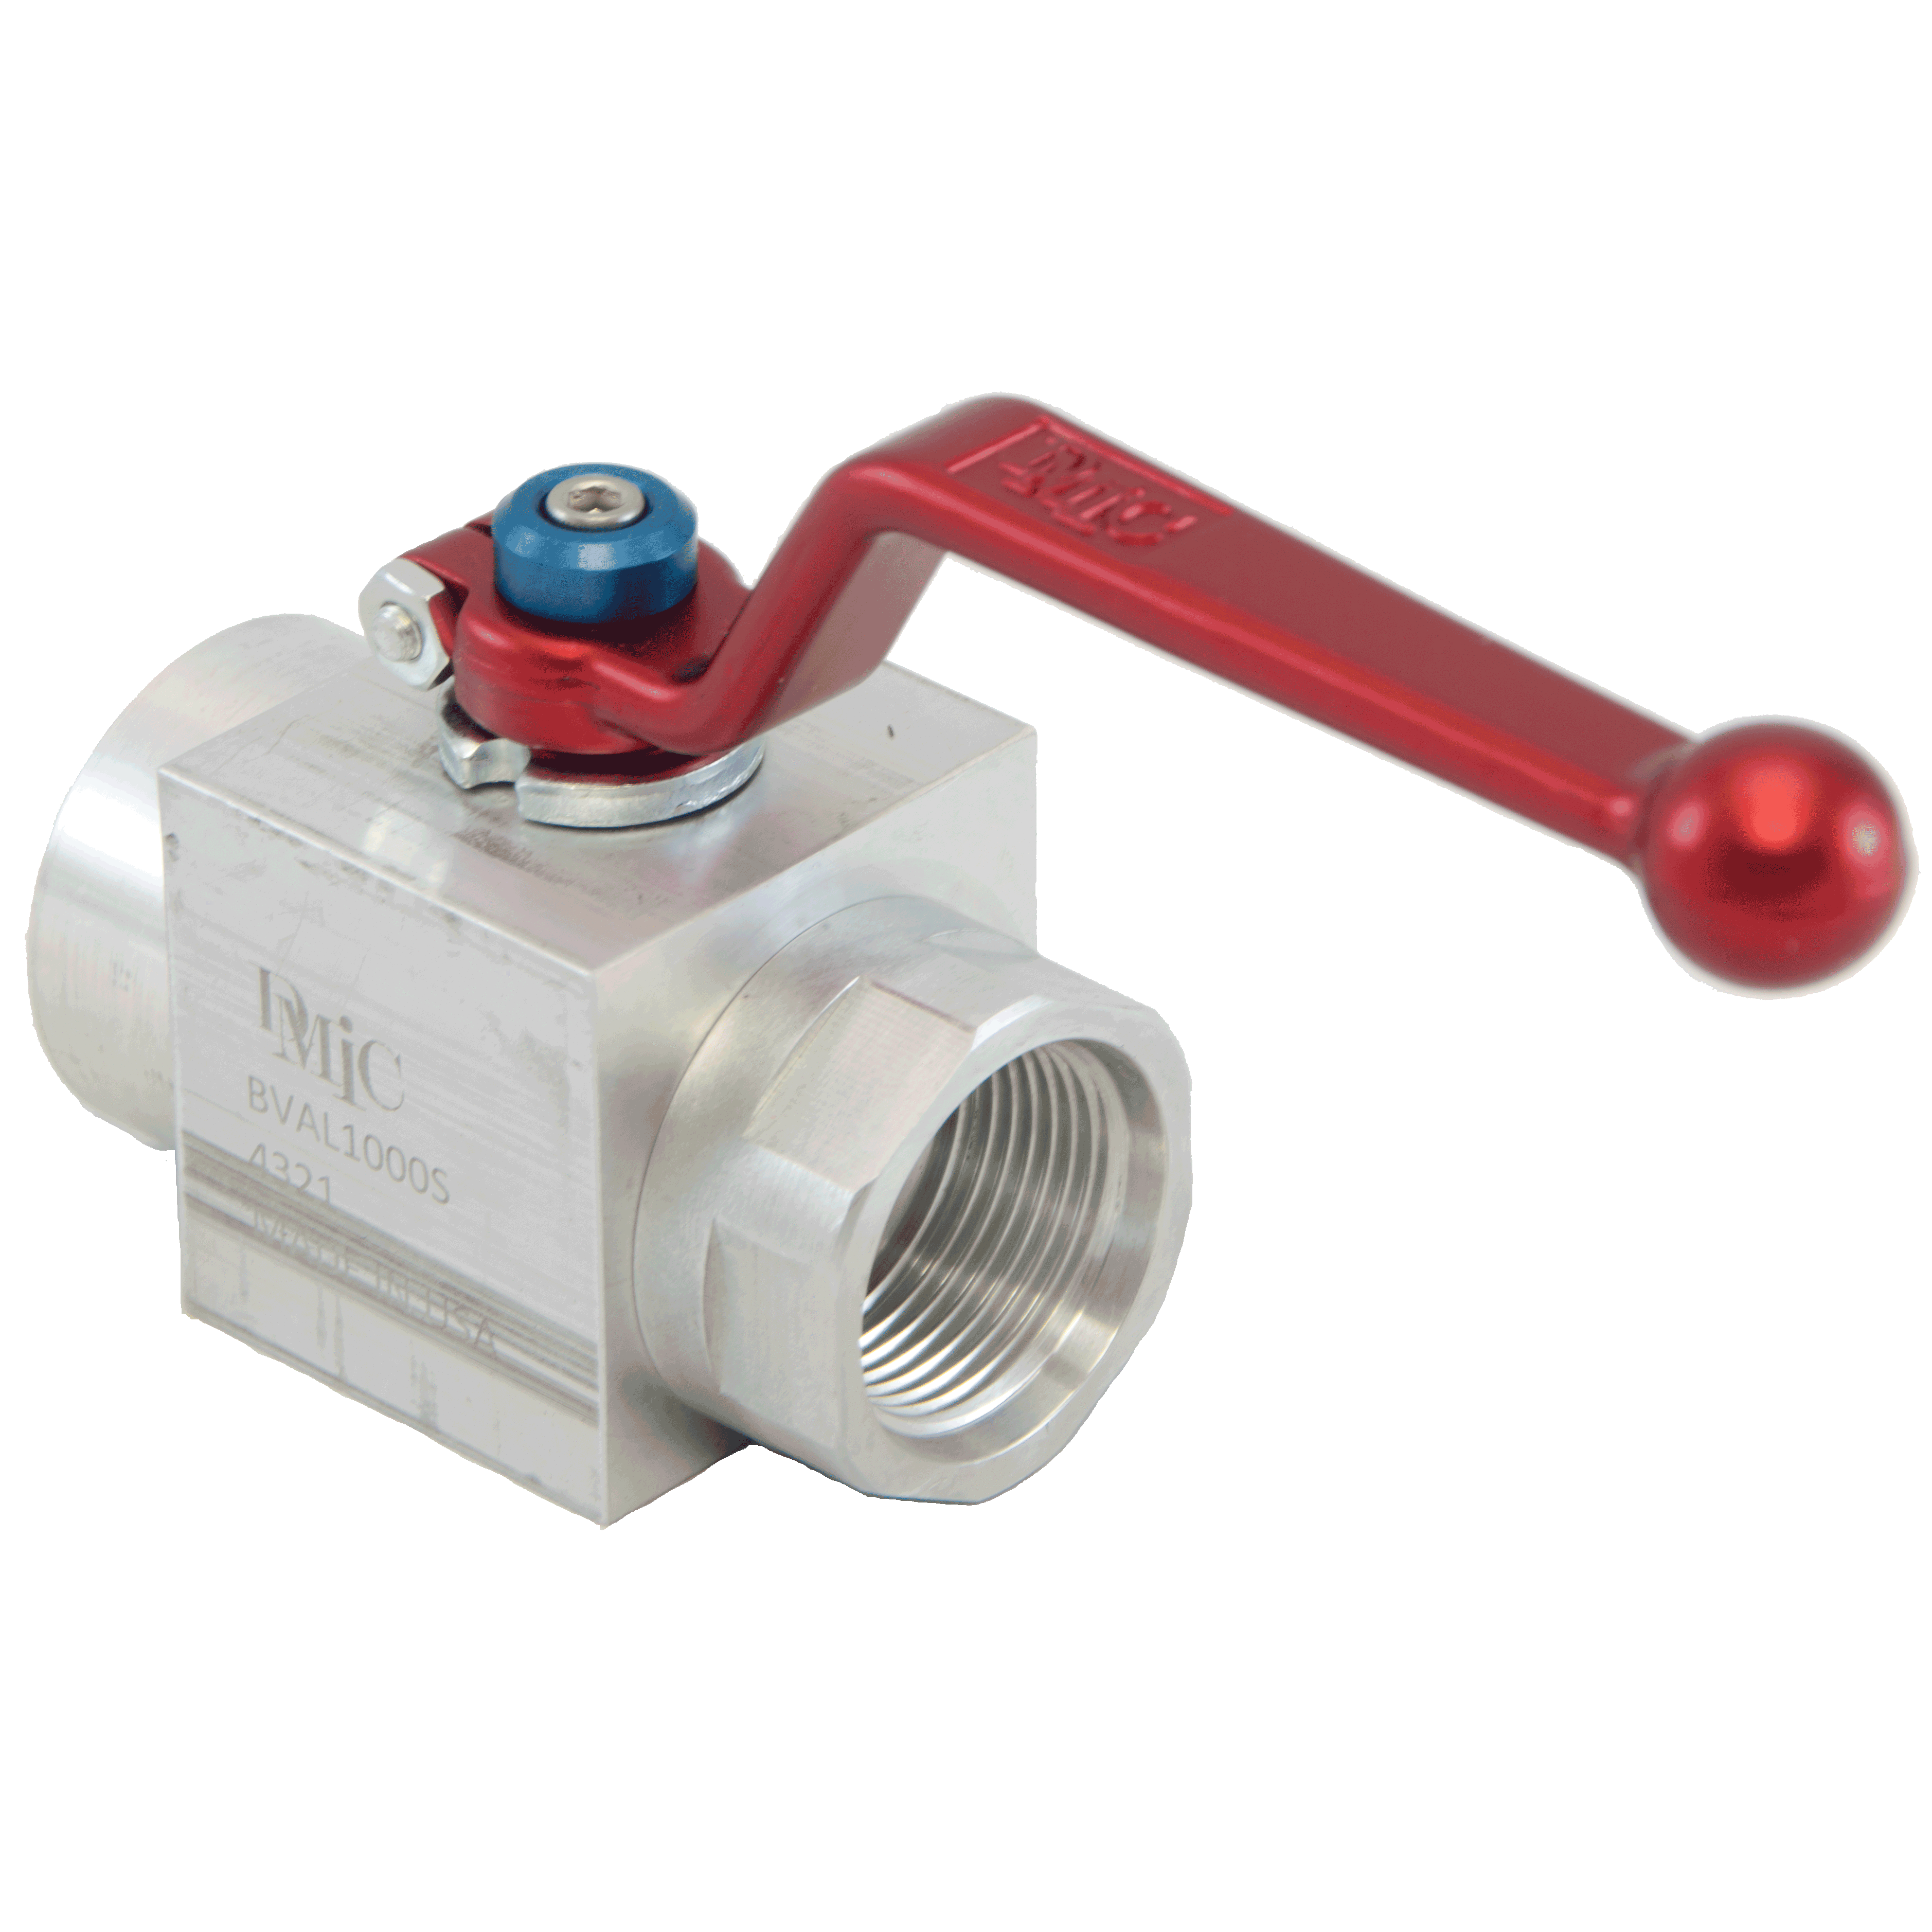 BVAL-1000S-4321-AZZN : DMIC Suction Ball Valve, #16 SAE (1), Aluminum, 600psi, Two-Way